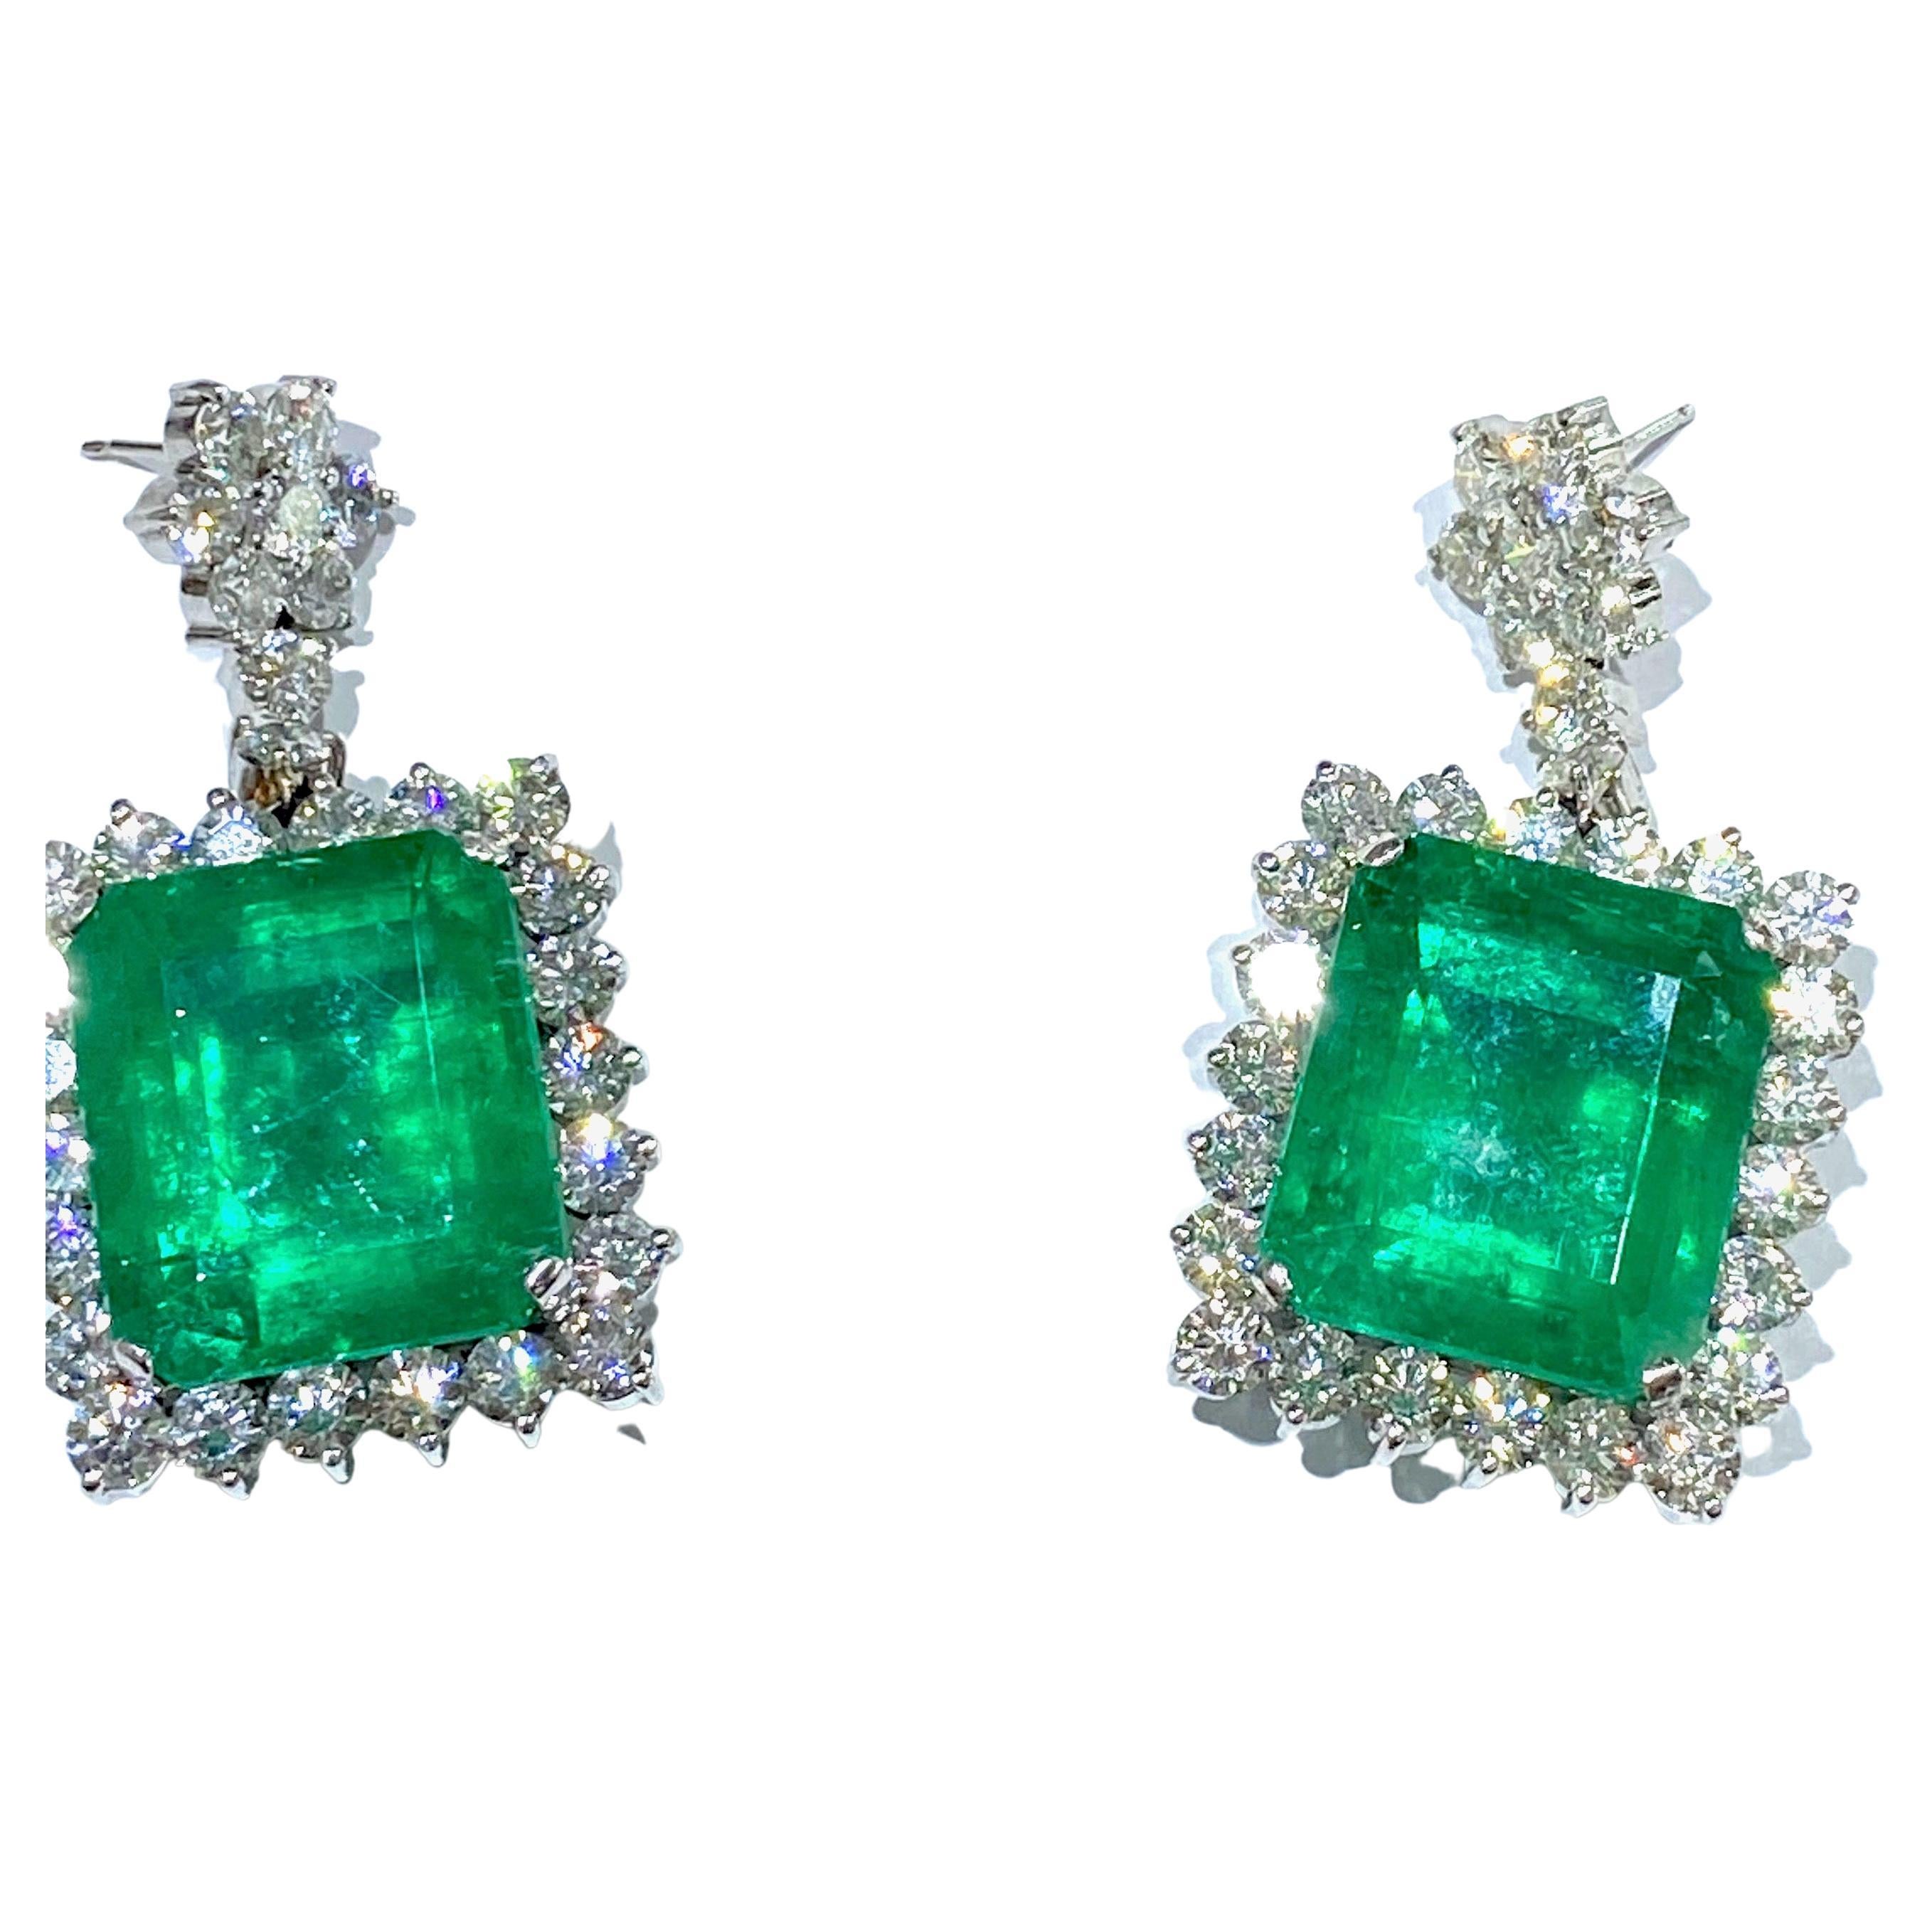 65.69 Carat Colombian Emerald and Diamond Halo Drop Earrings

Stunning, one-of-a-kind earrings are Emeralds that are weighed in at 65.69 carats. These are beautifully matched, difficult to replace, extremely large, and hard to acquire quality and